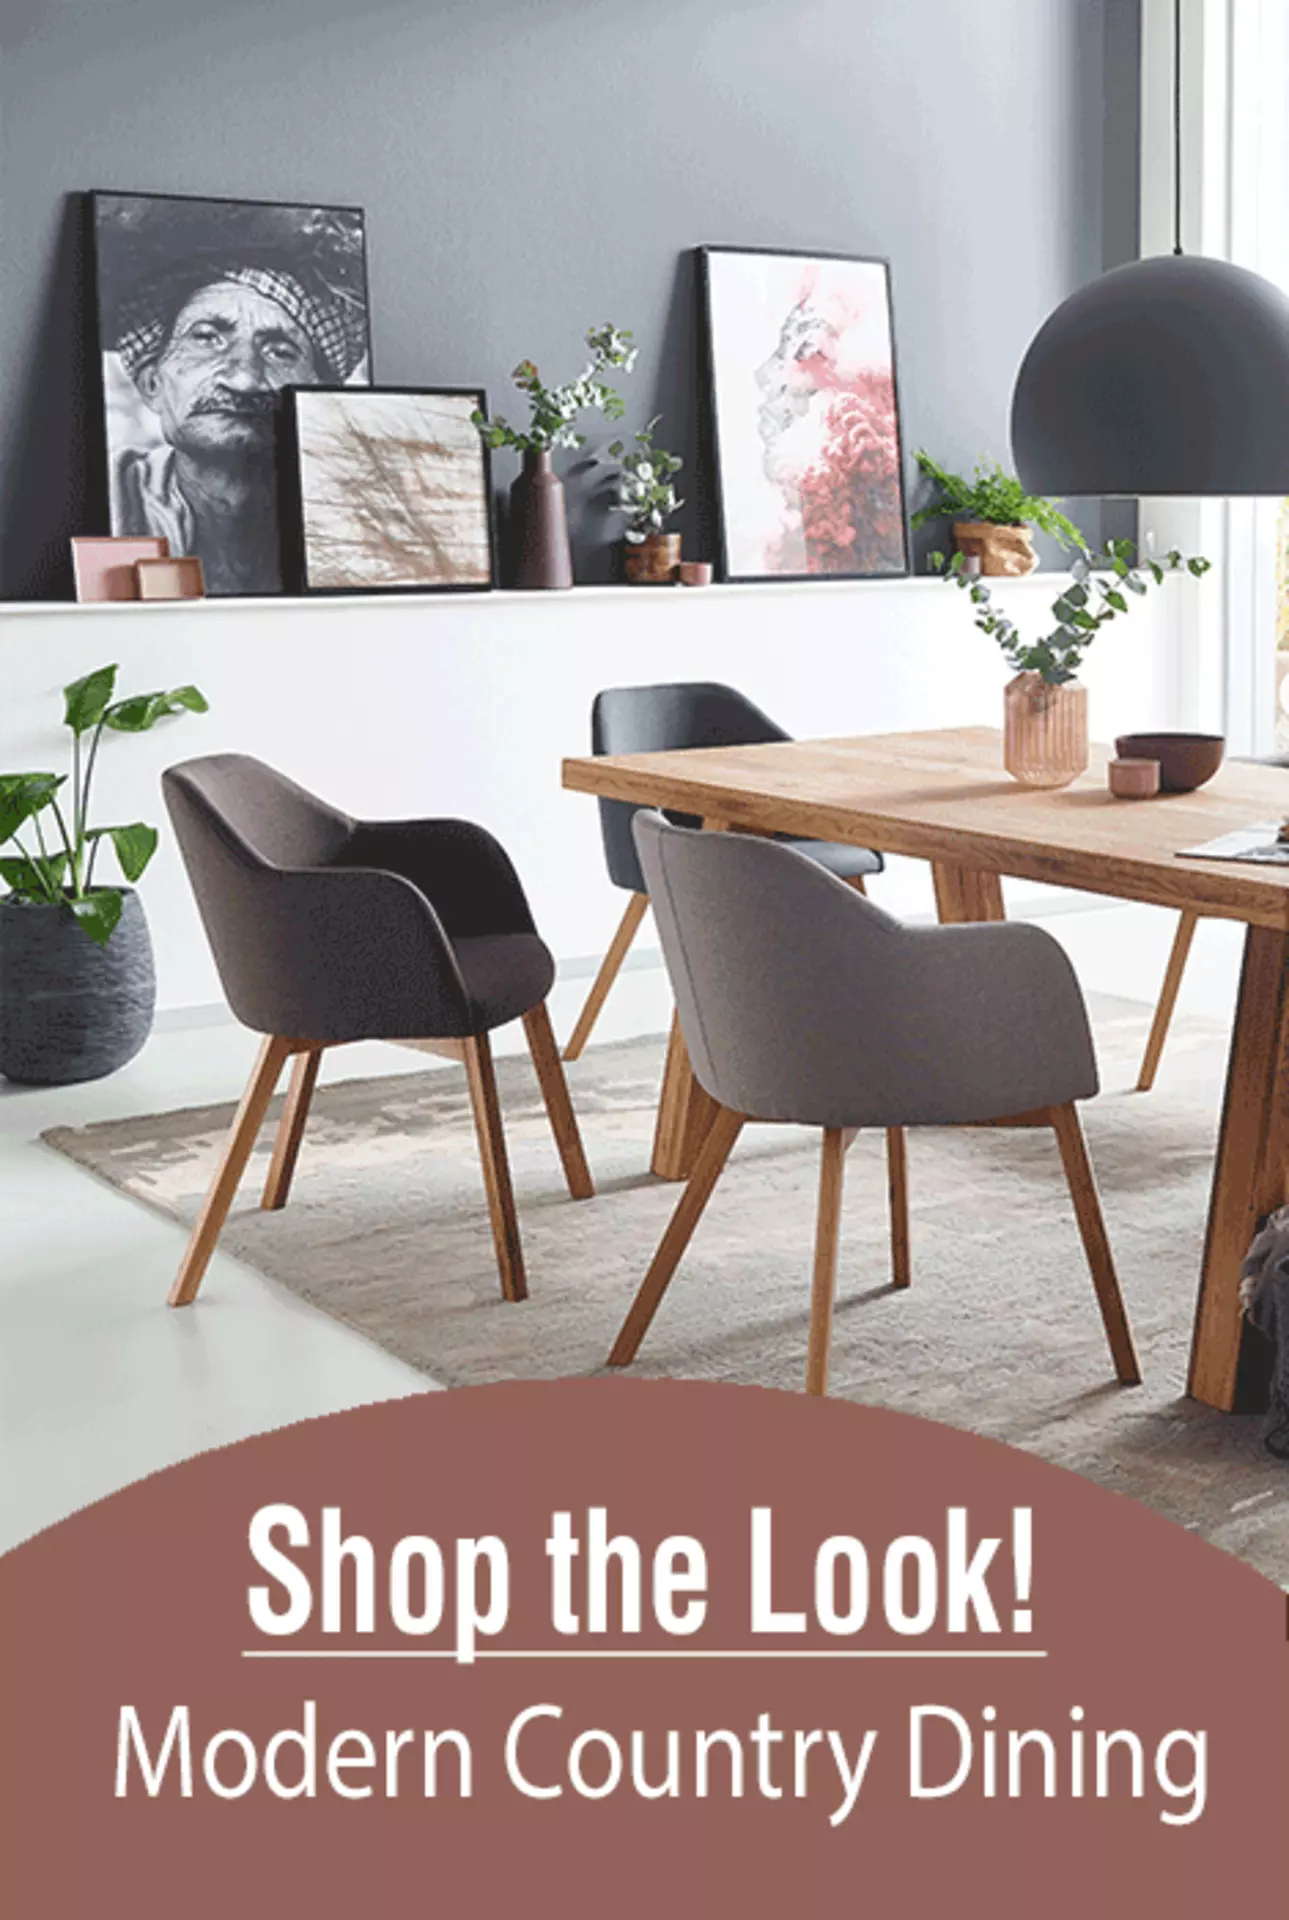 Shop the Look - Modern Country Dining Teaserbild